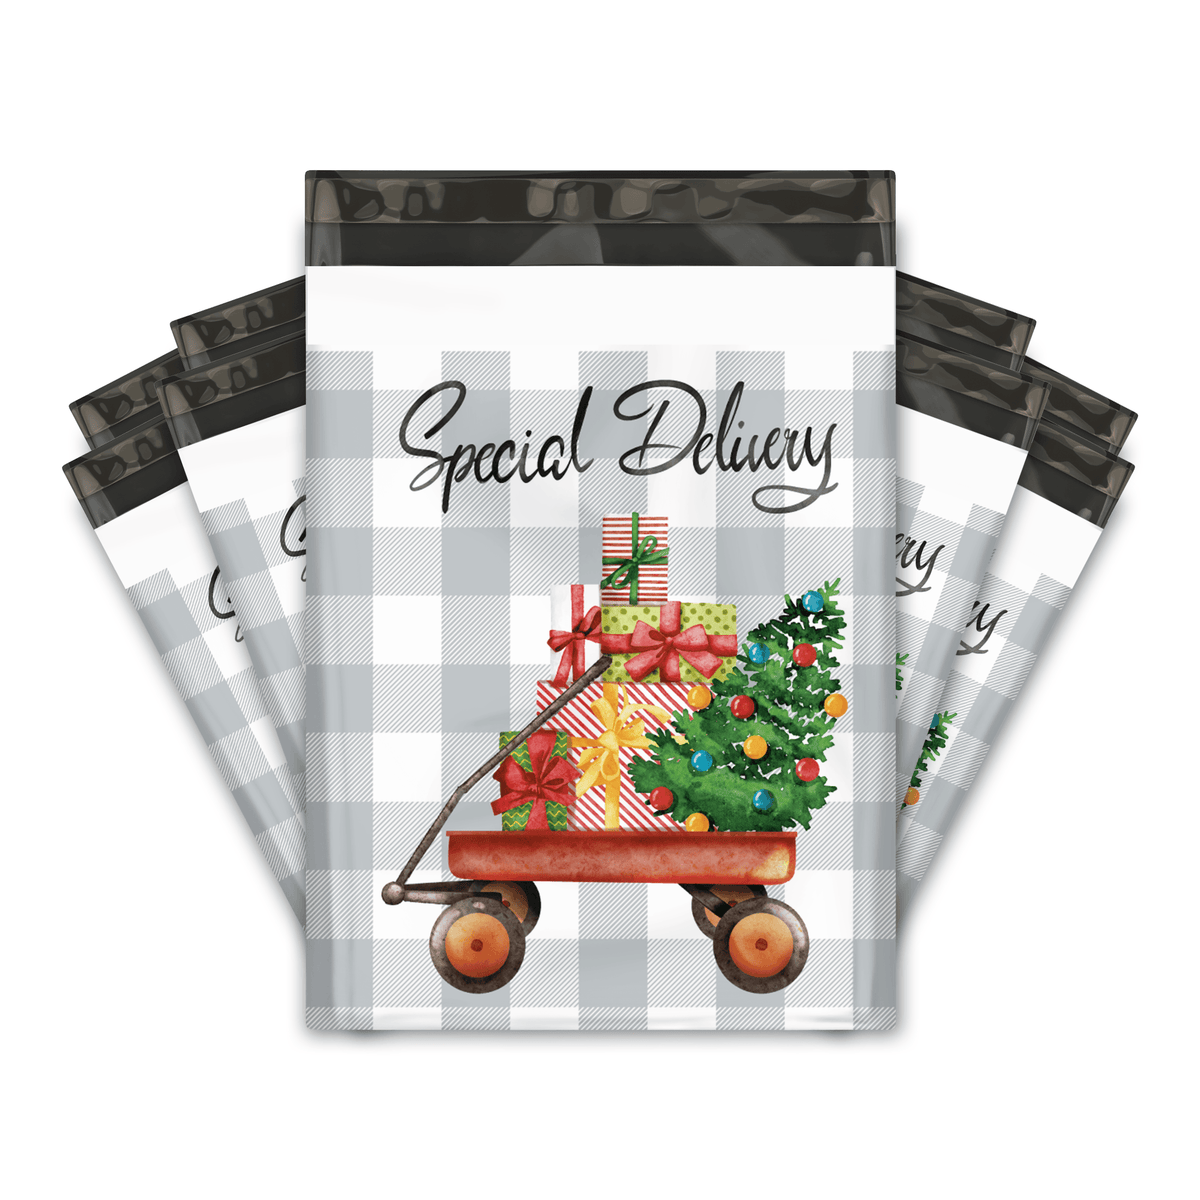 10x13 Christmas Wagon Designer Poly Mailers Shipping Envelopes Premium Printed Bags - Pro Supply Global